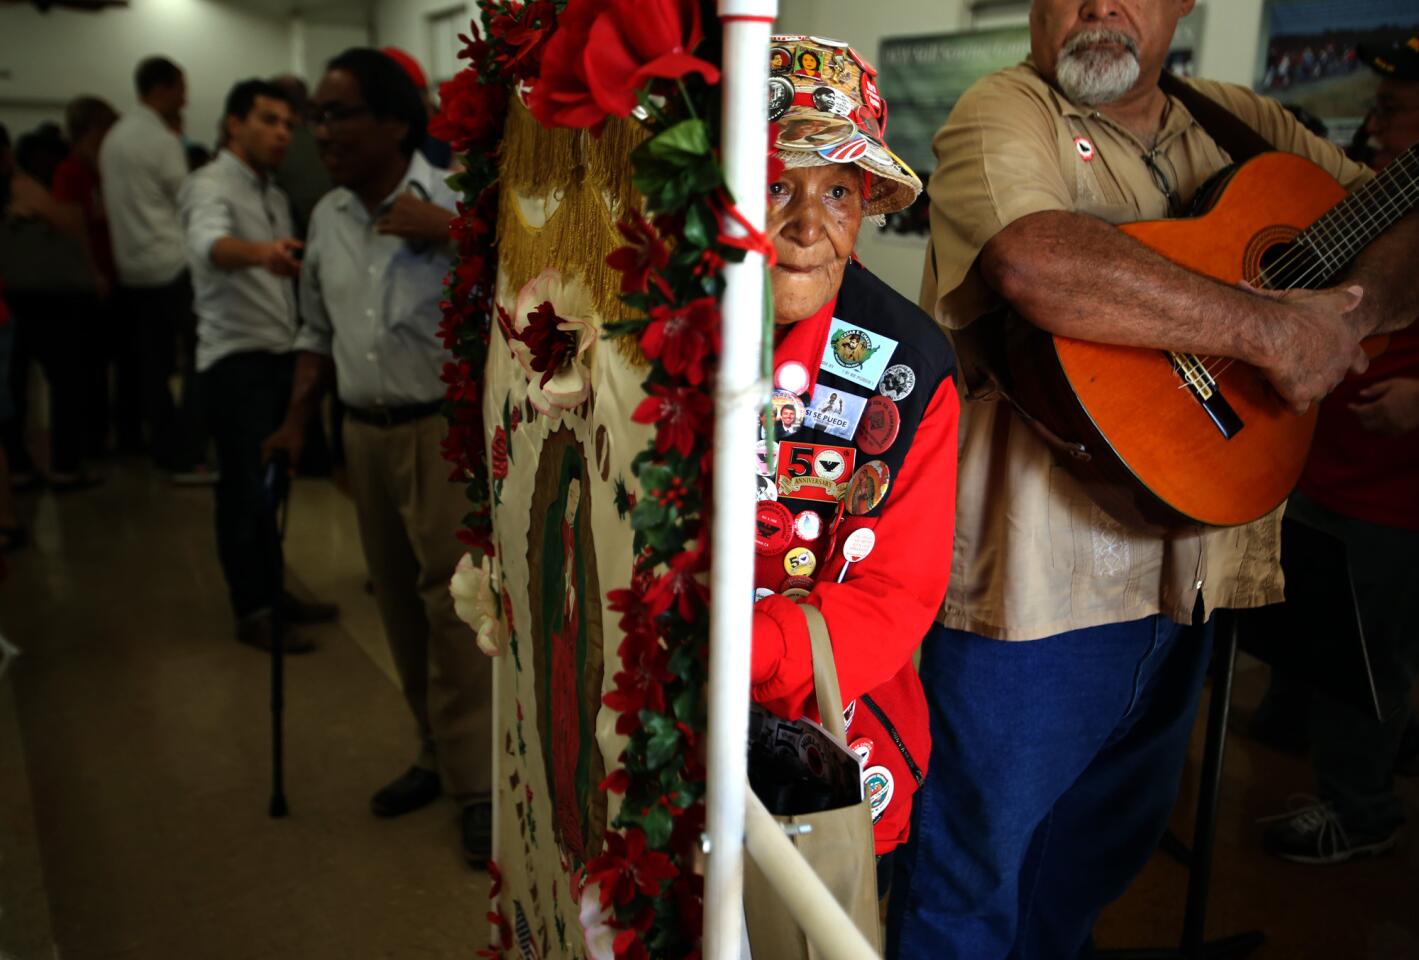 Josefina Flores, 85, a striker with Cesar Chavez in 1965, makes her way through the crowd with a banner during the 50th-anniversary commemoration of the Delano grape strike at the Forty Acres complex.